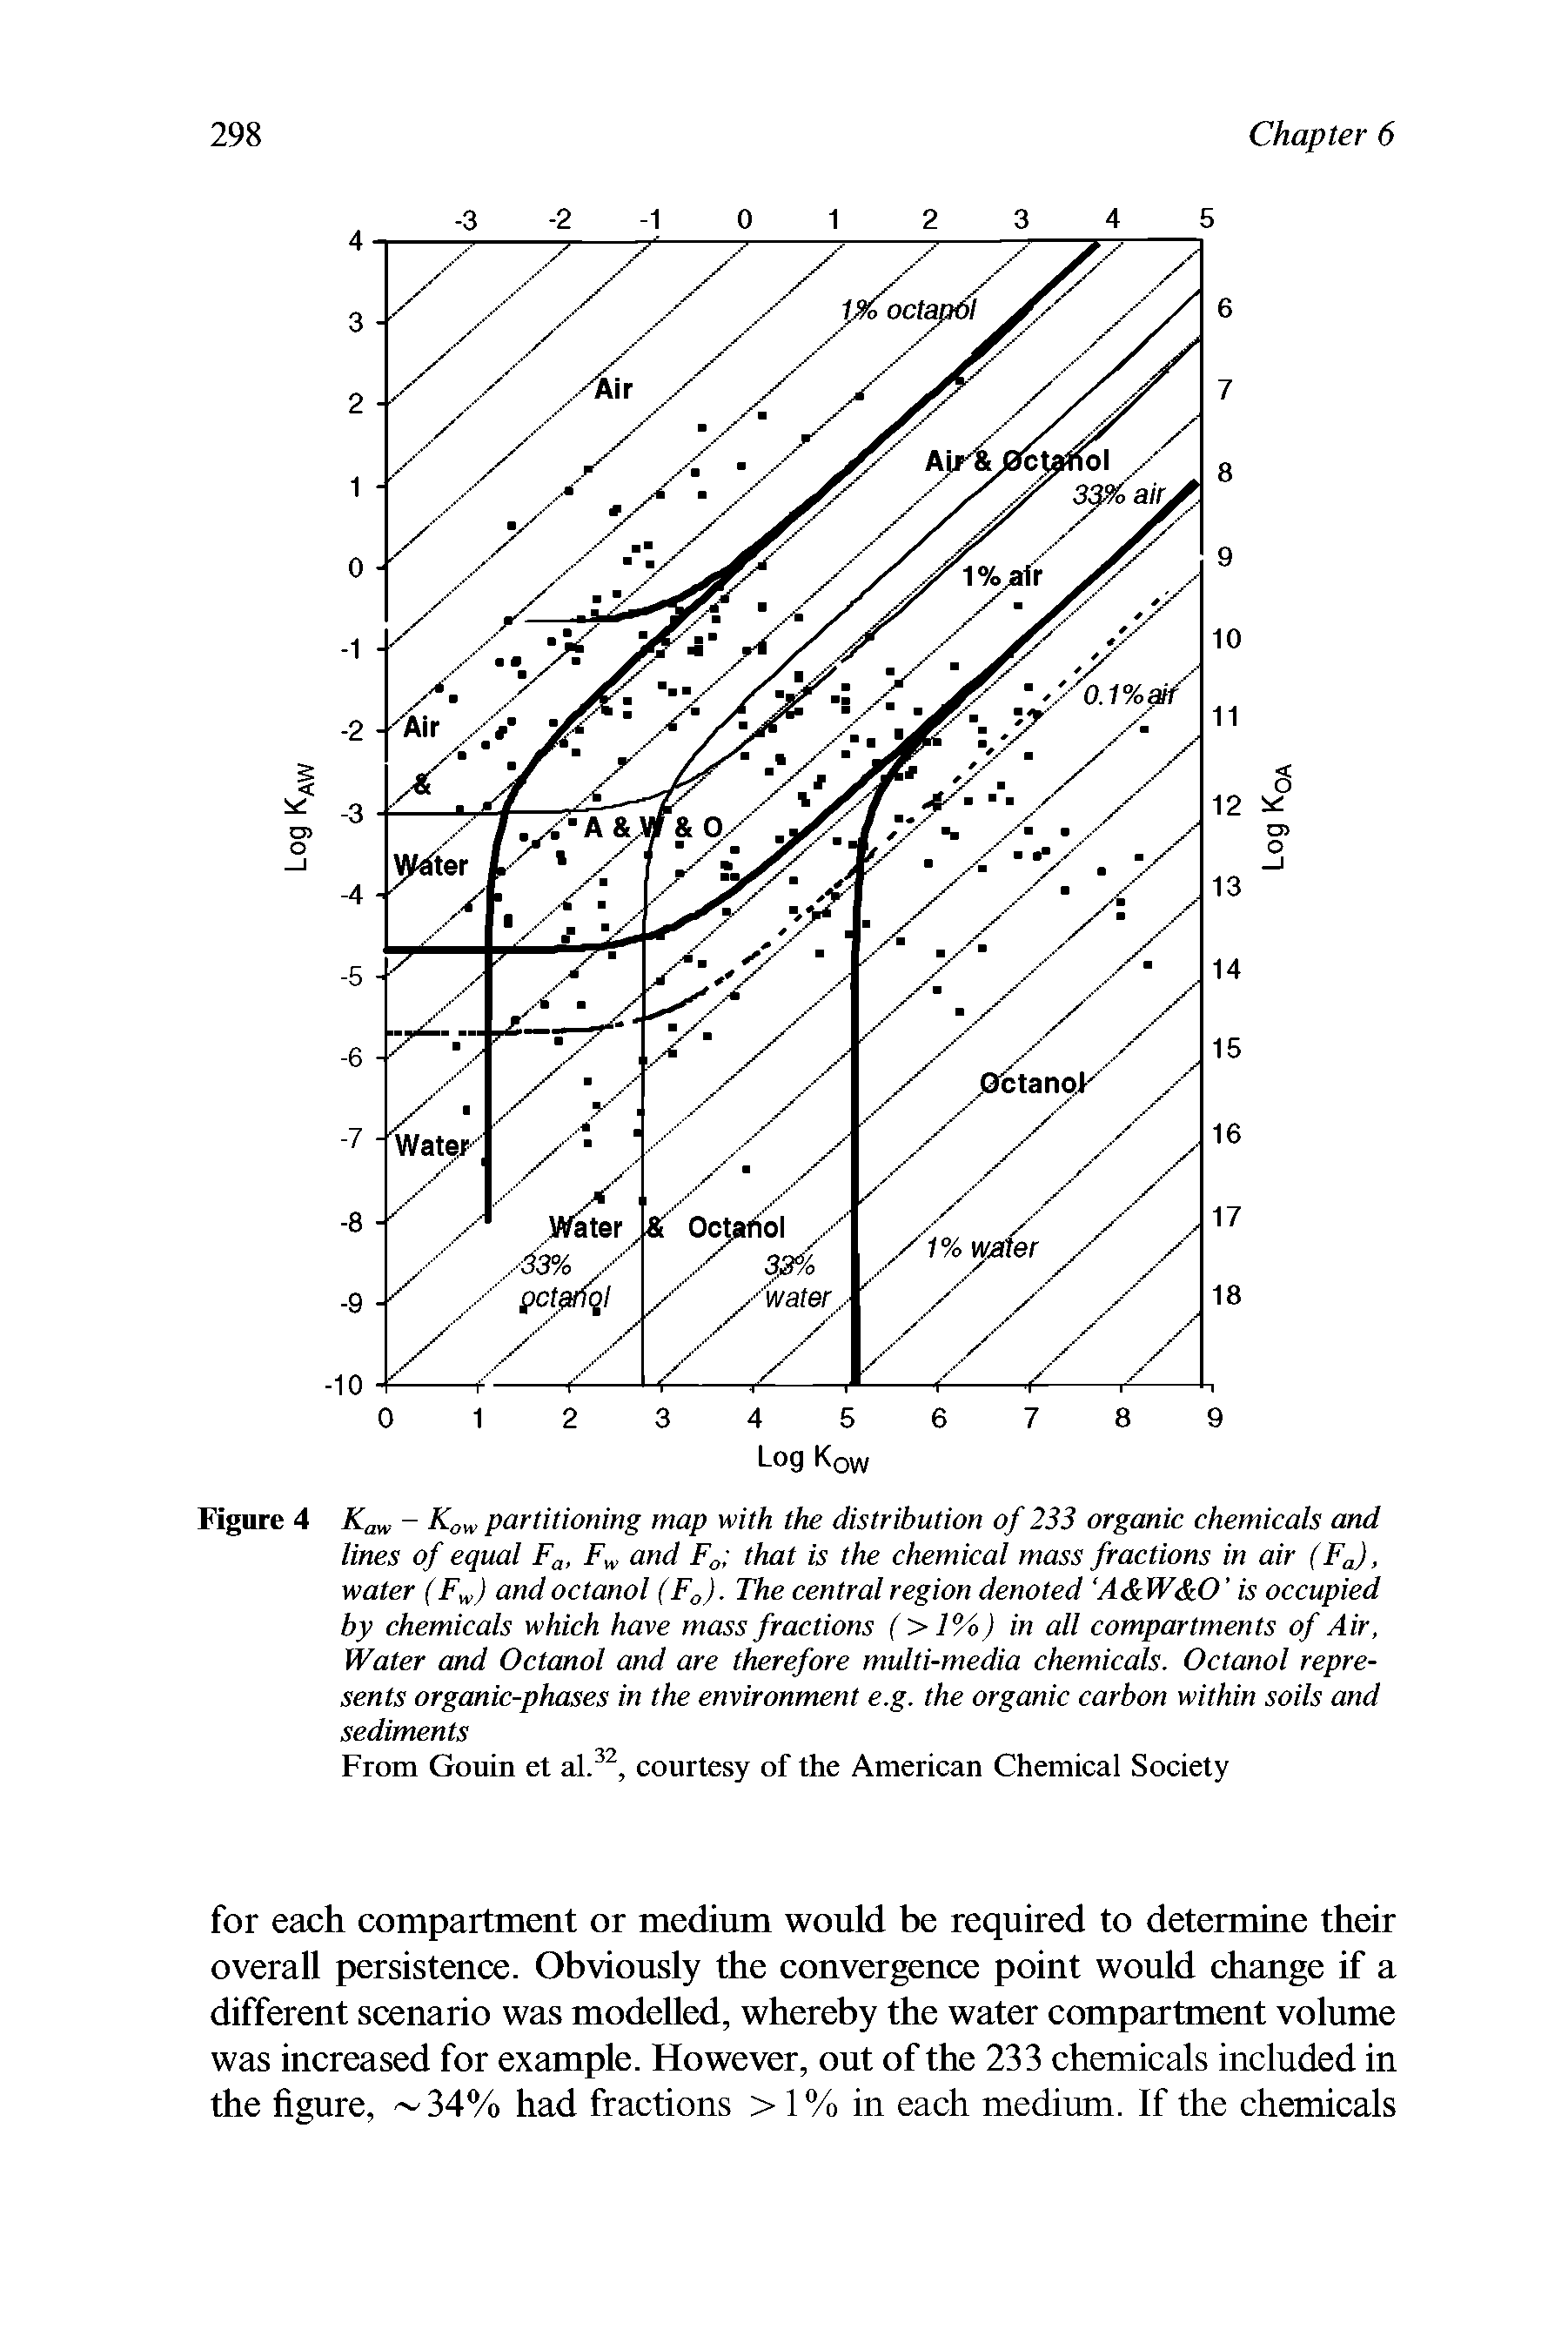 Figure 4 K - partitioning map with the distribution of 233 organic chemicals and lines of equal Fg, and Fgt that is the chemical mass fractions in air (Fg), water (F ) and octanol (Fg). The central region denoted A W O is occupied by chemicals which have mass fractions ( >1%) in all compartments of Air, Water and Octanol and are therefore multi-media chemicals. Octanol represents organic-phases in the environment e.g. the organic carbon within soils and sediments...